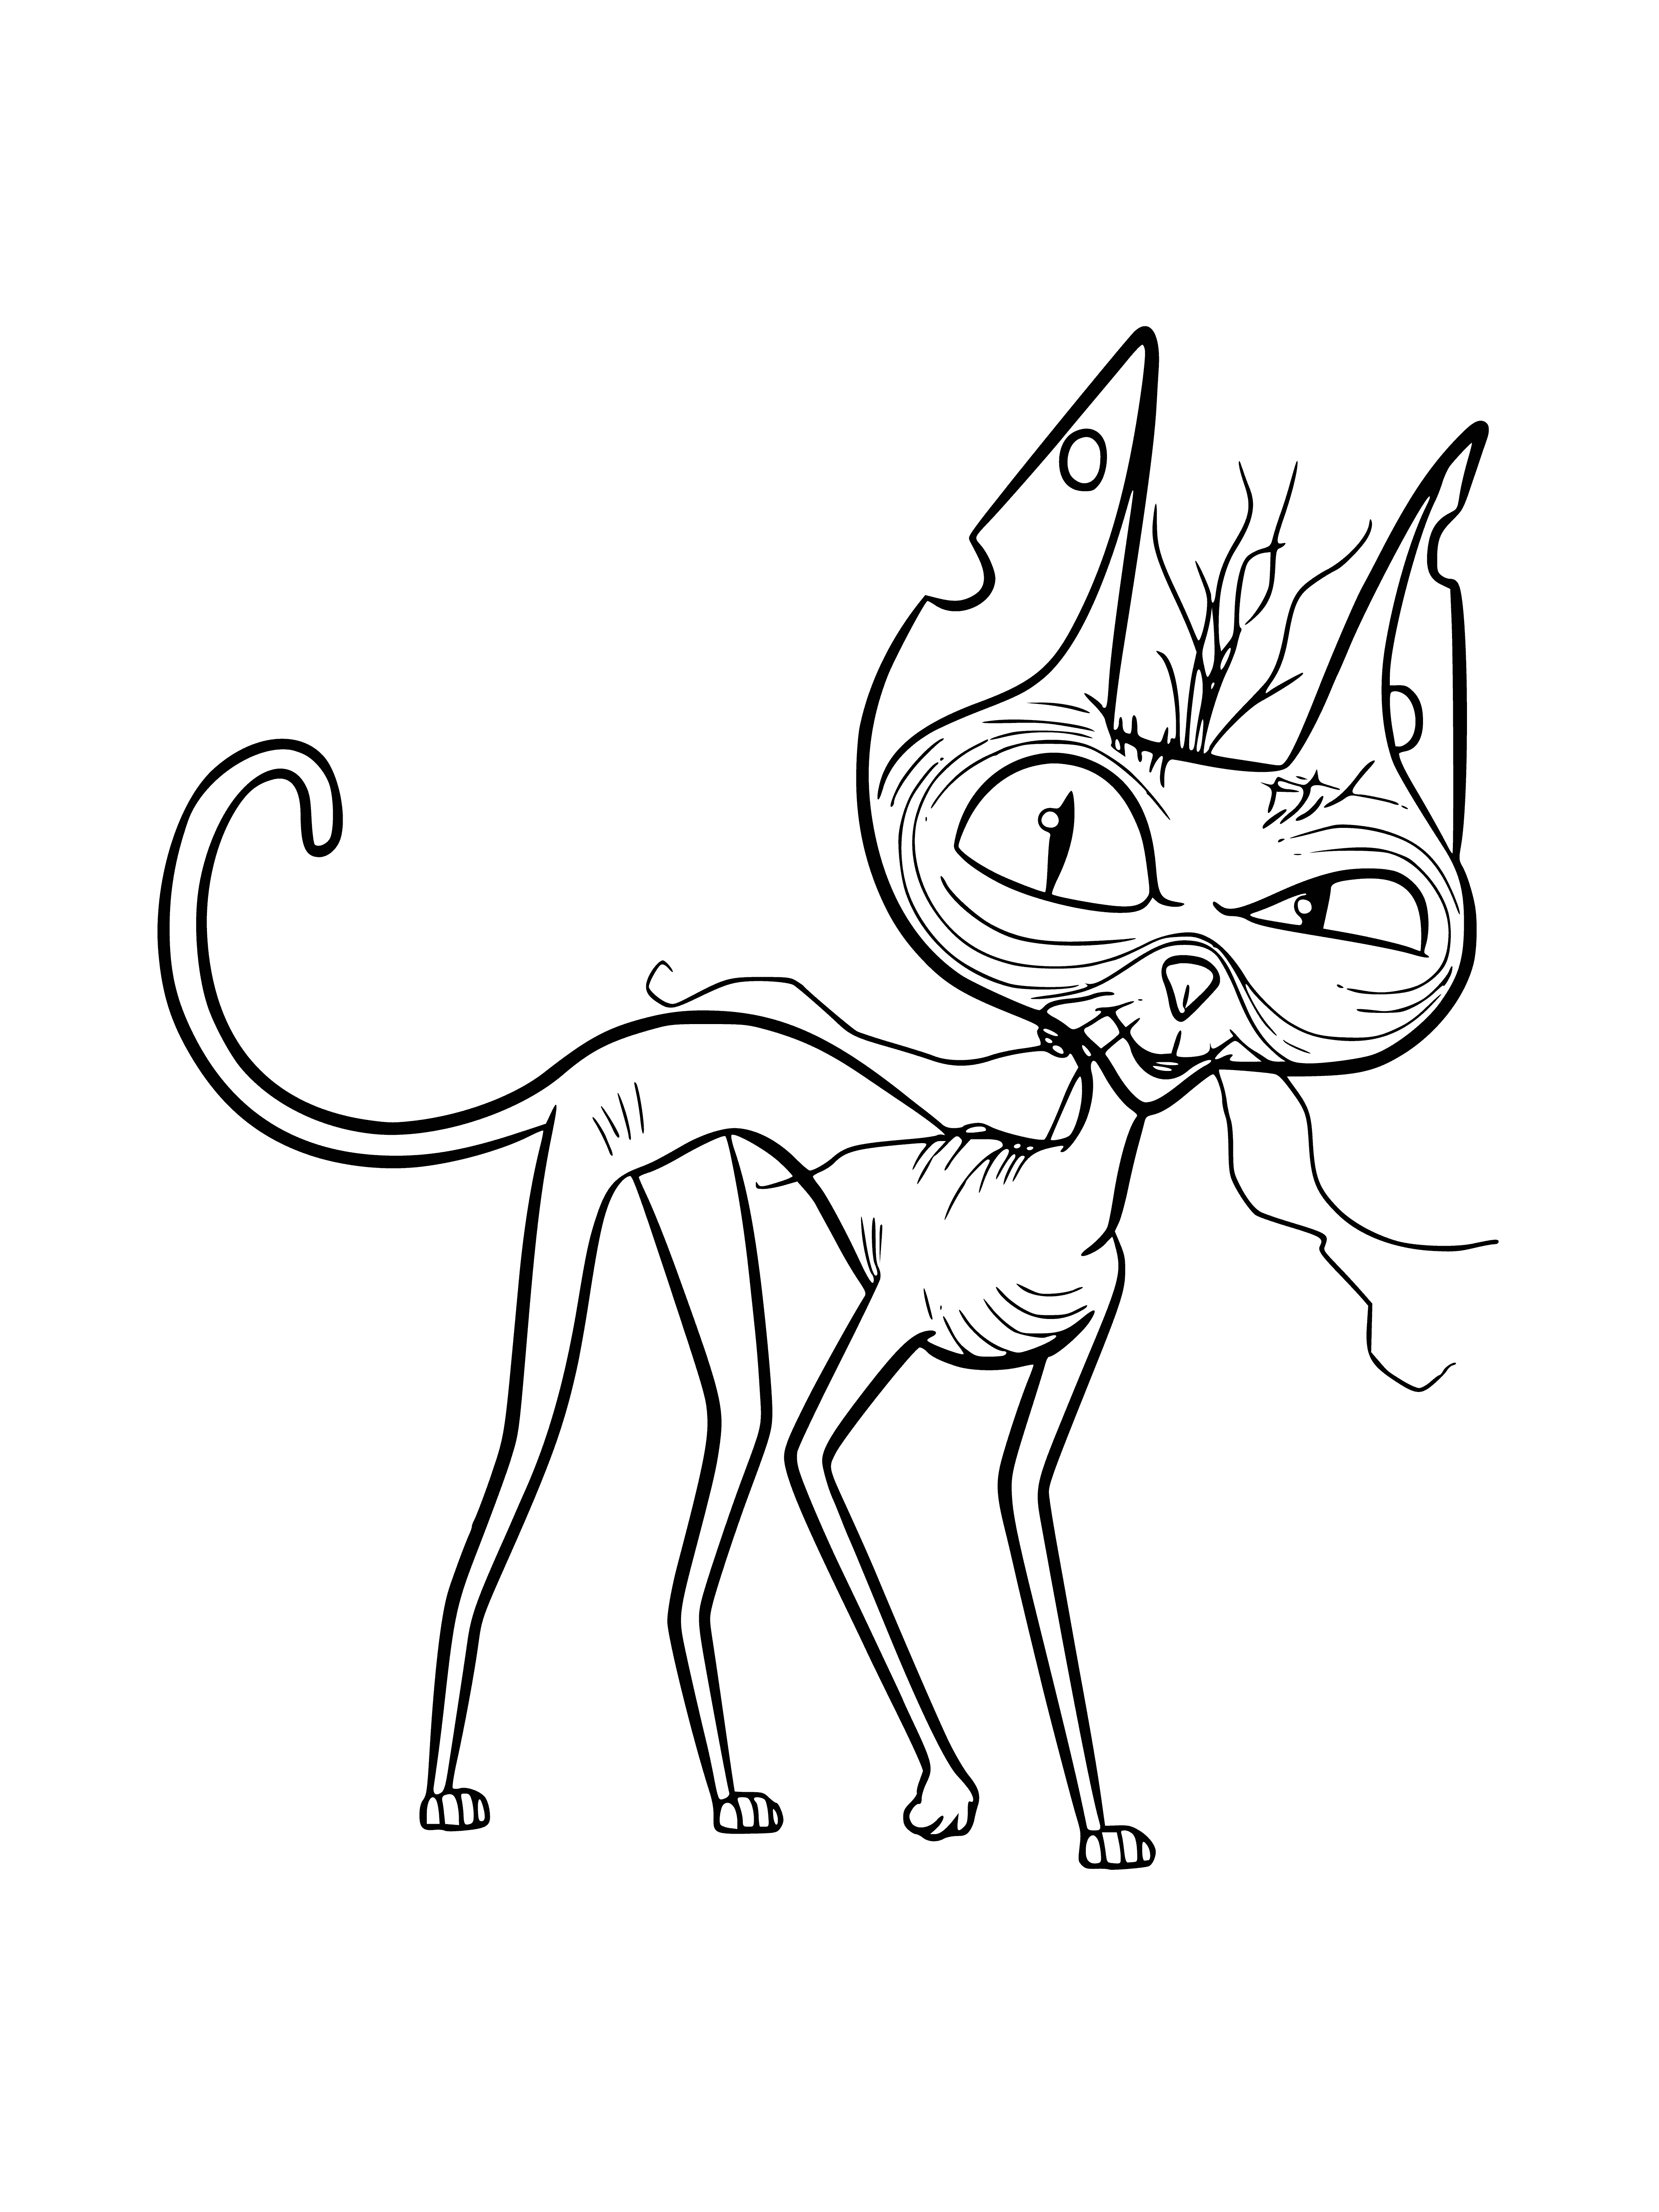 Sphynx cat Ozone coloring page